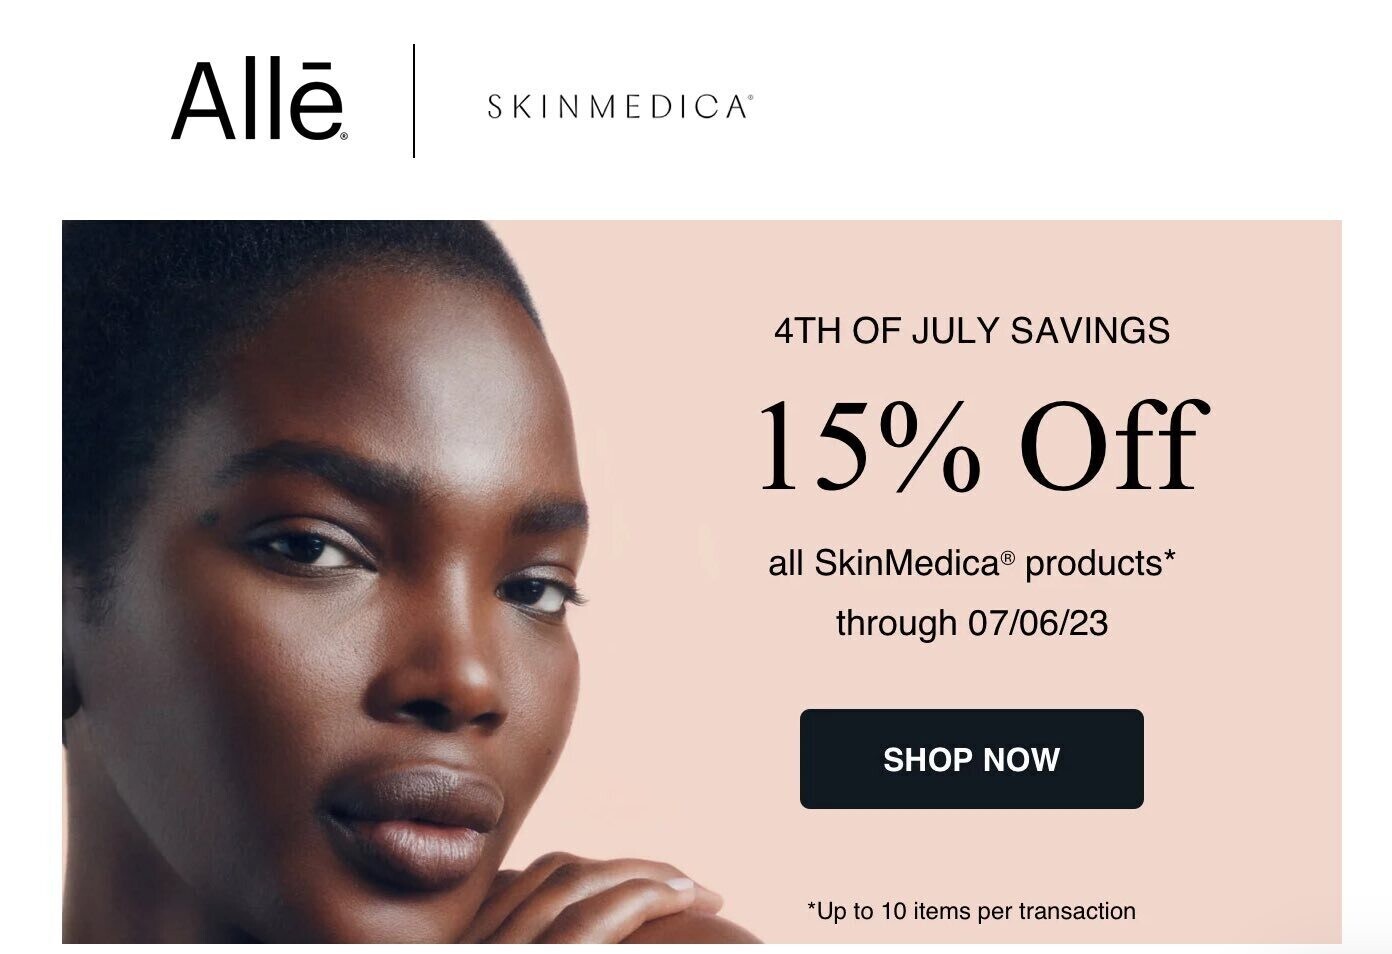 "4th of July savings - 15% Off" email by Alle